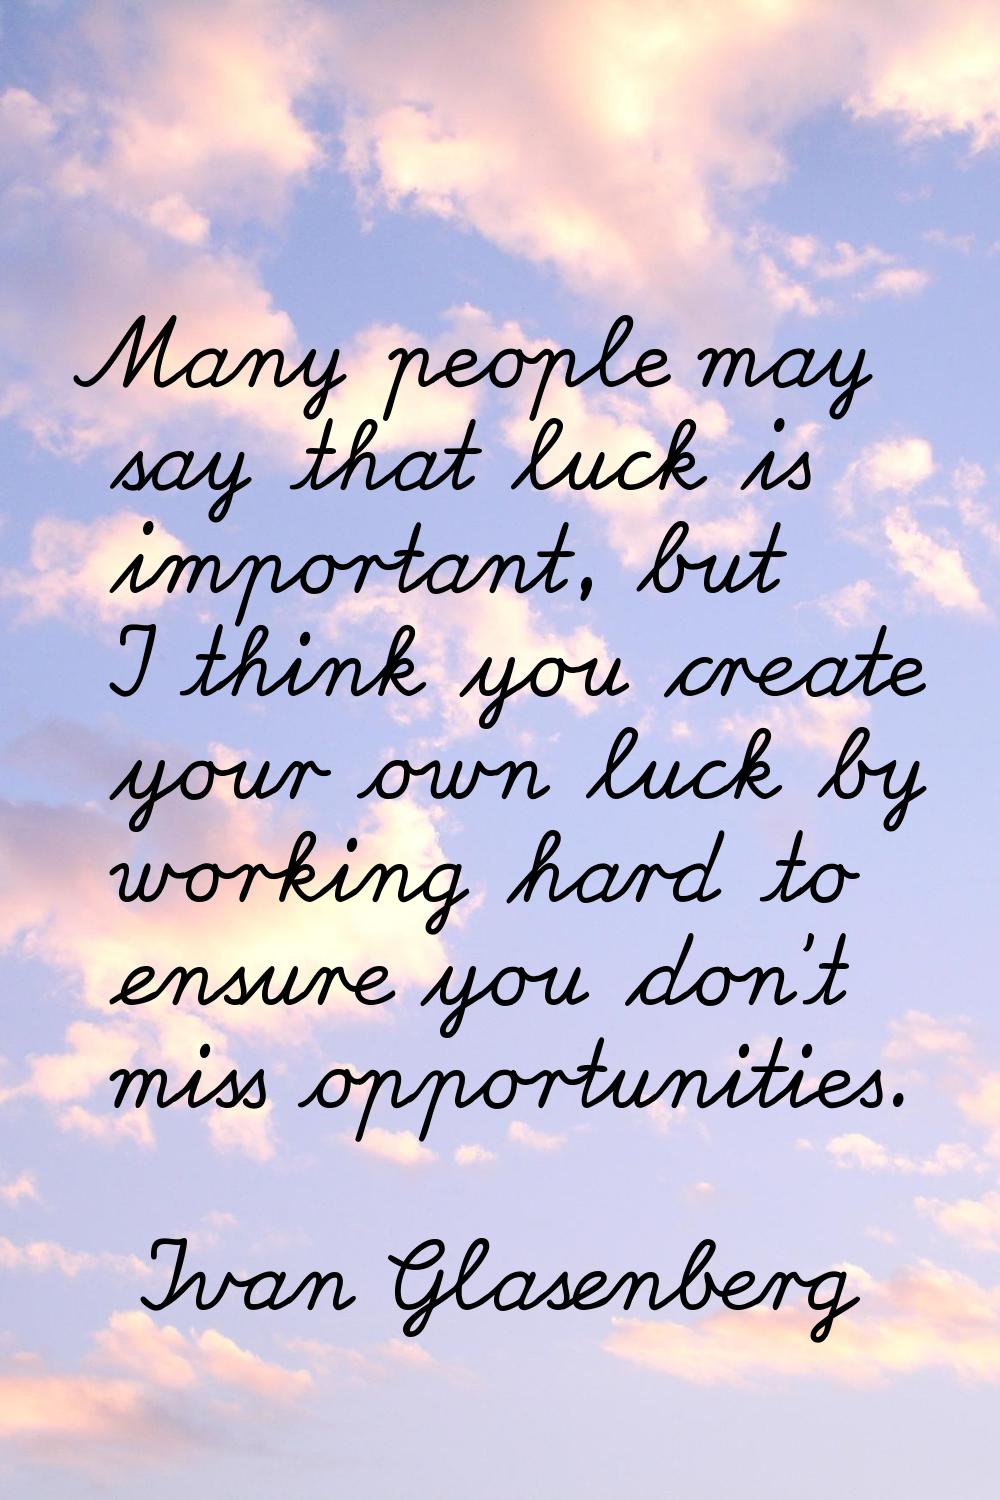 Many people may say that luck is important, but I think you create your own luck by working hard to